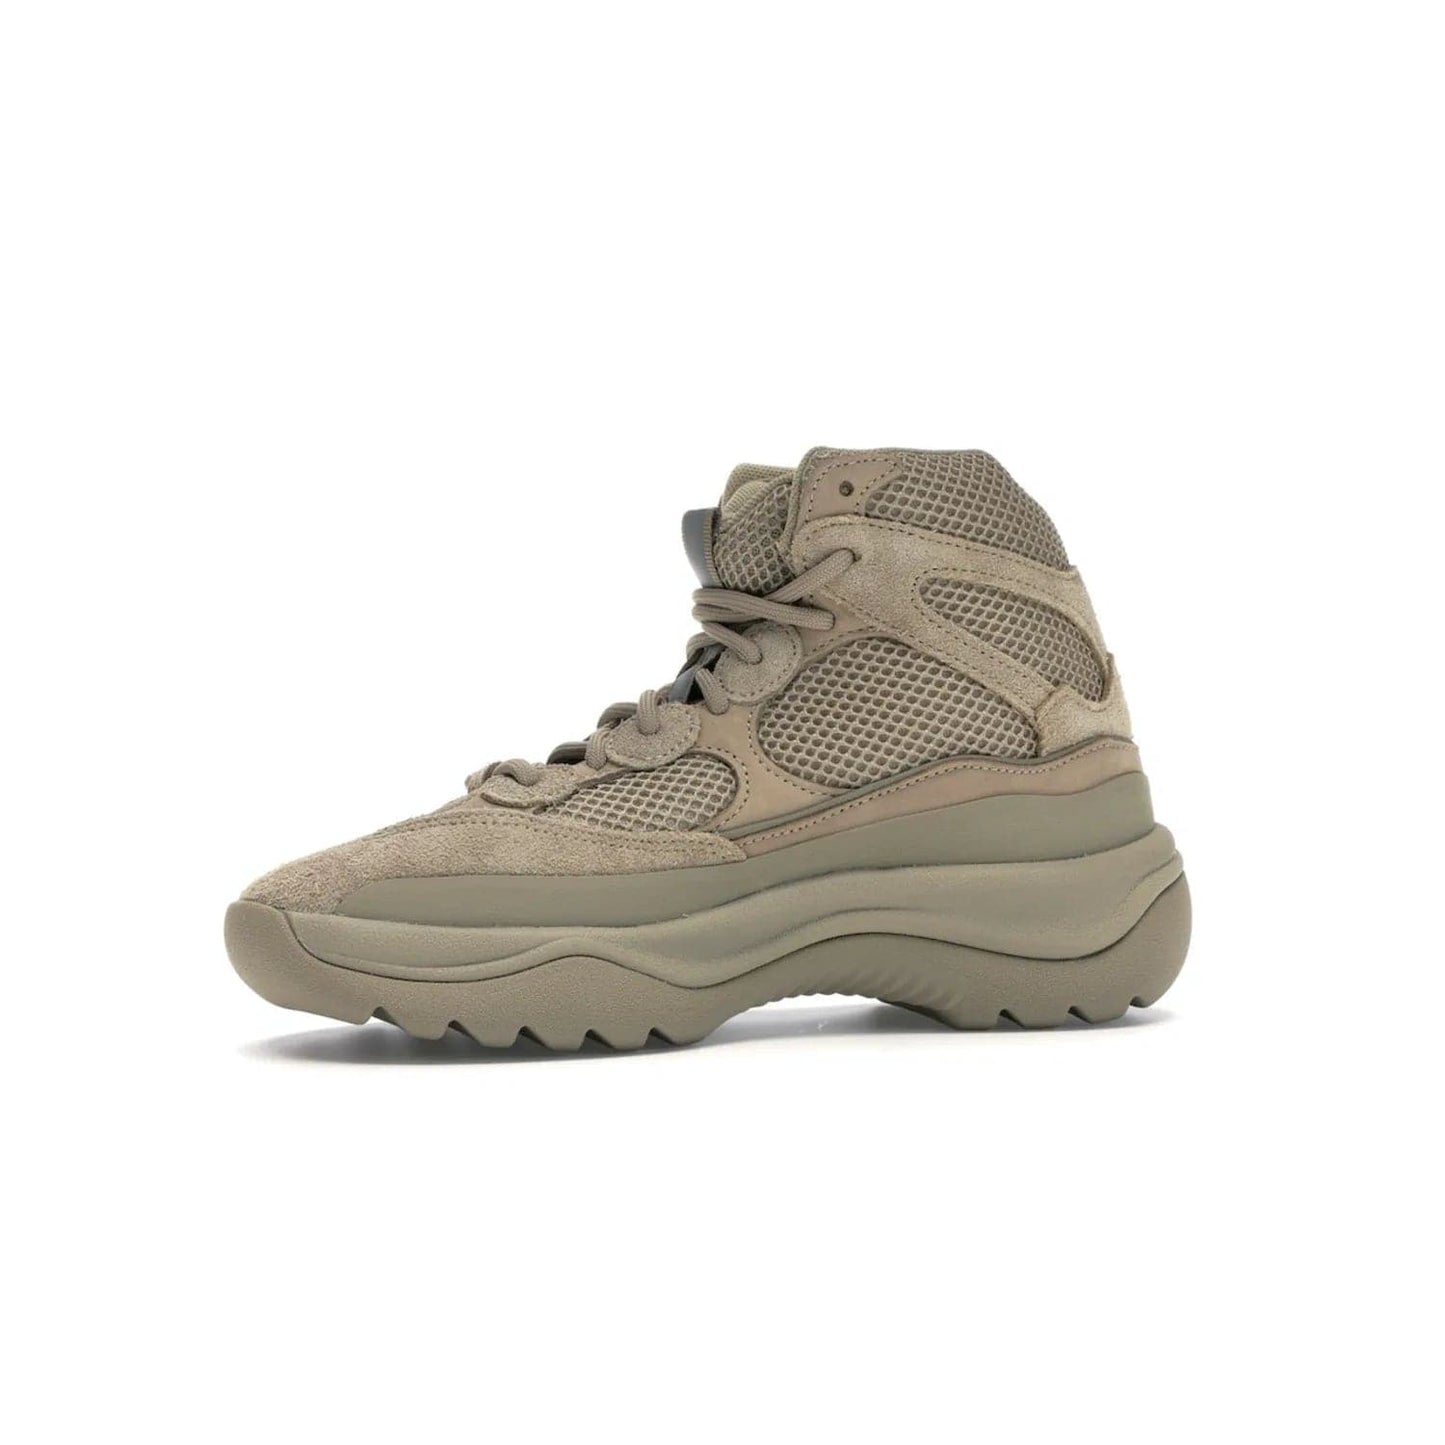 adidas Yeezy Desert Boot Rock - Image 17 - Only at www.BallersClubKickz.com - #
This season, make a fashion statement with the adidas Yeezy Desert Boot Rock. Nubuck and suede upper offers tonal style while the grooved sole provides traction and stability. Get yours in April 2019.